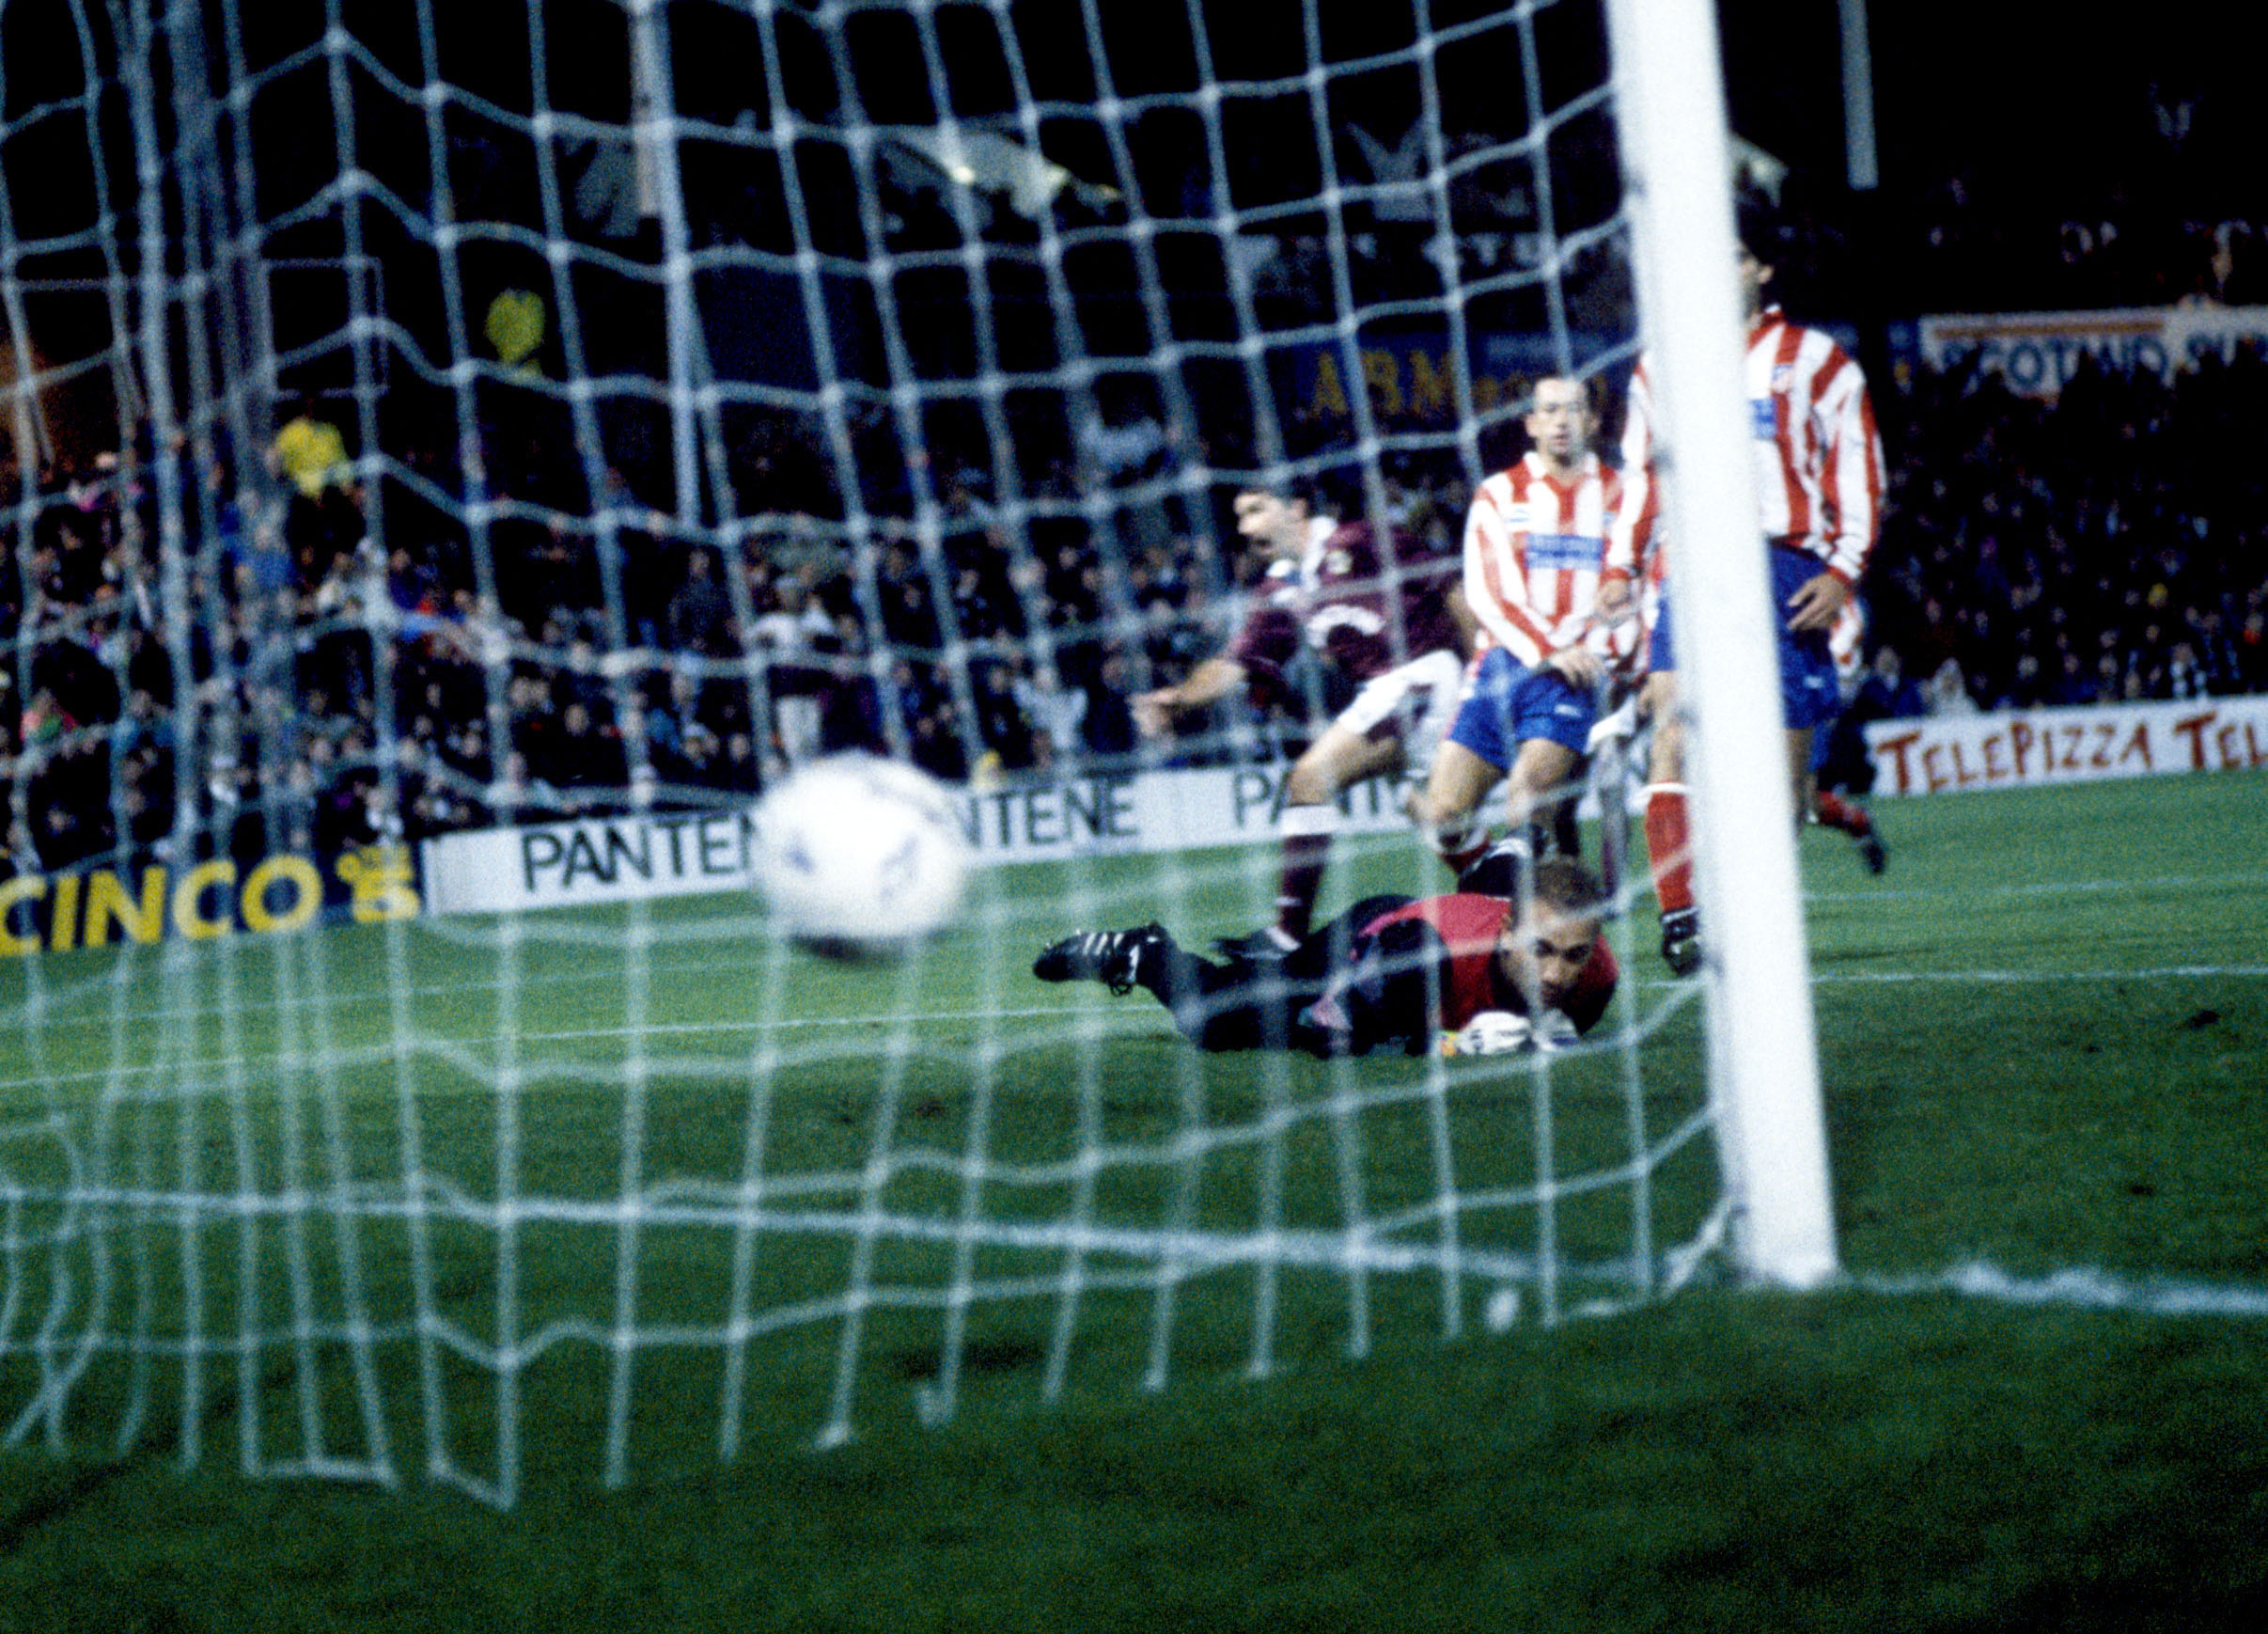 Hearts want more European nights at Tynecastle like this one in 1993 when John Robertson scored in a 2-1 win over Atletico Madrid.